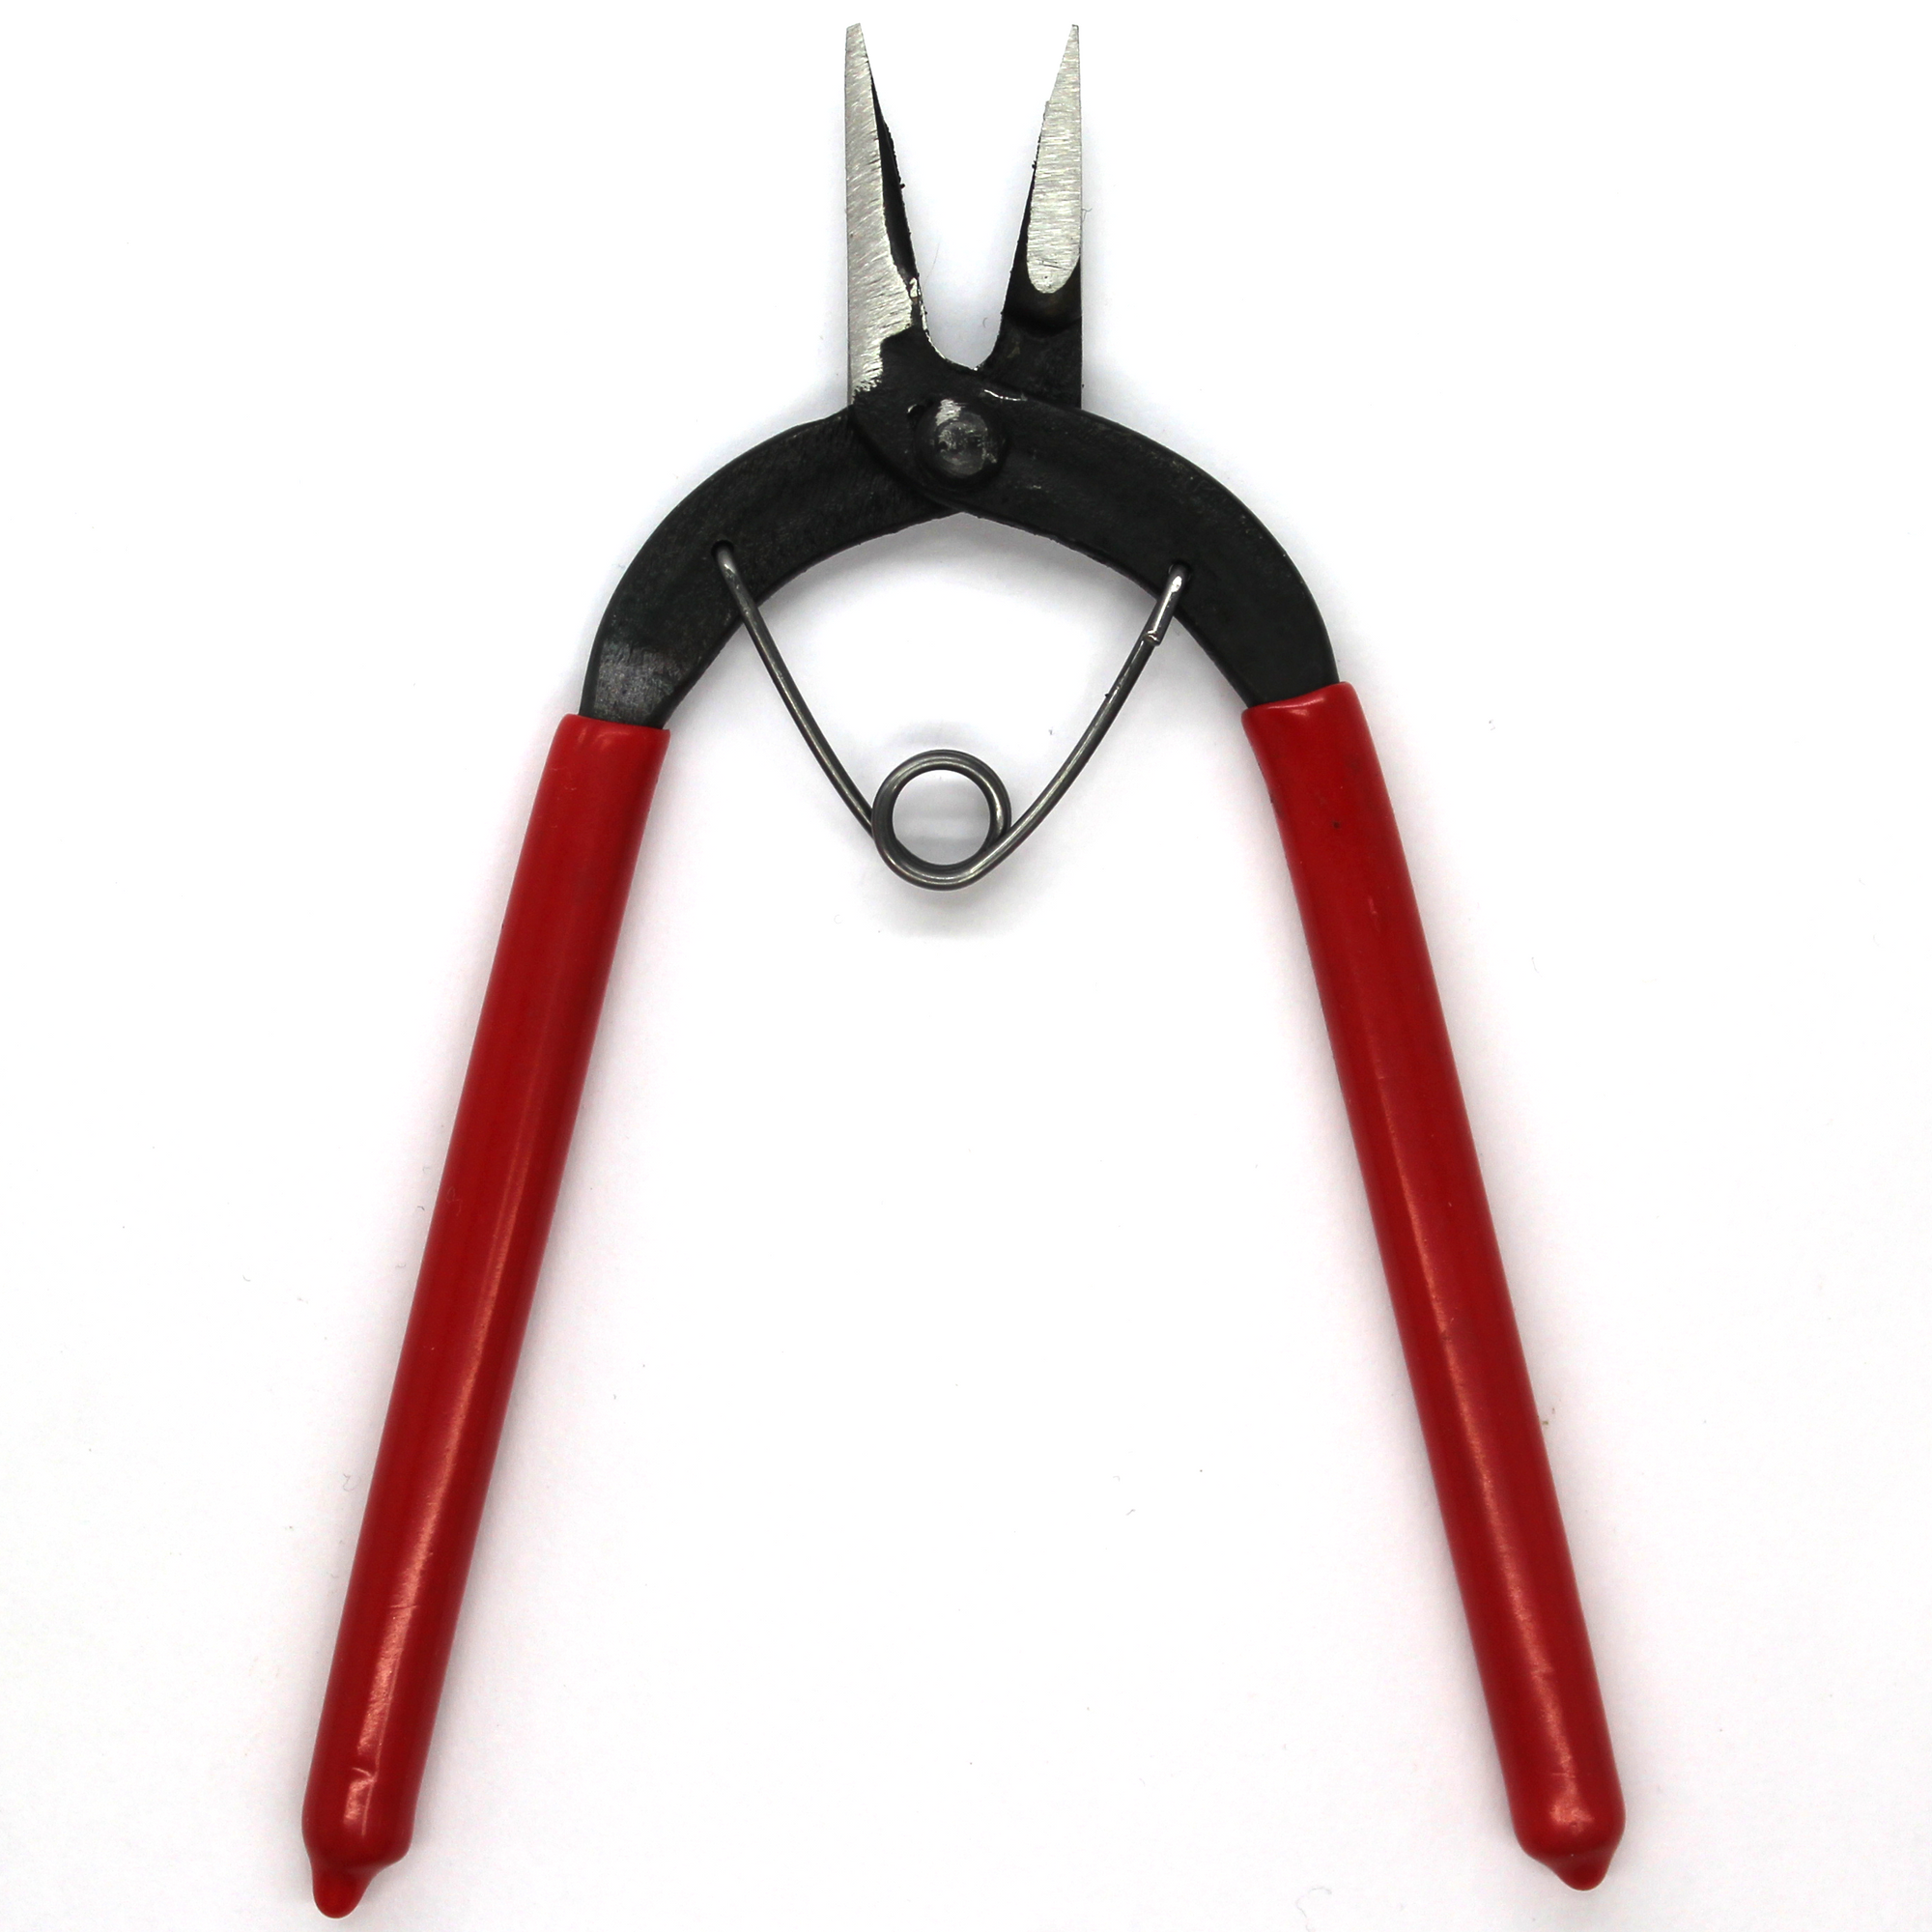 Tools, Pliers, Flat Nose, 4.6 inches